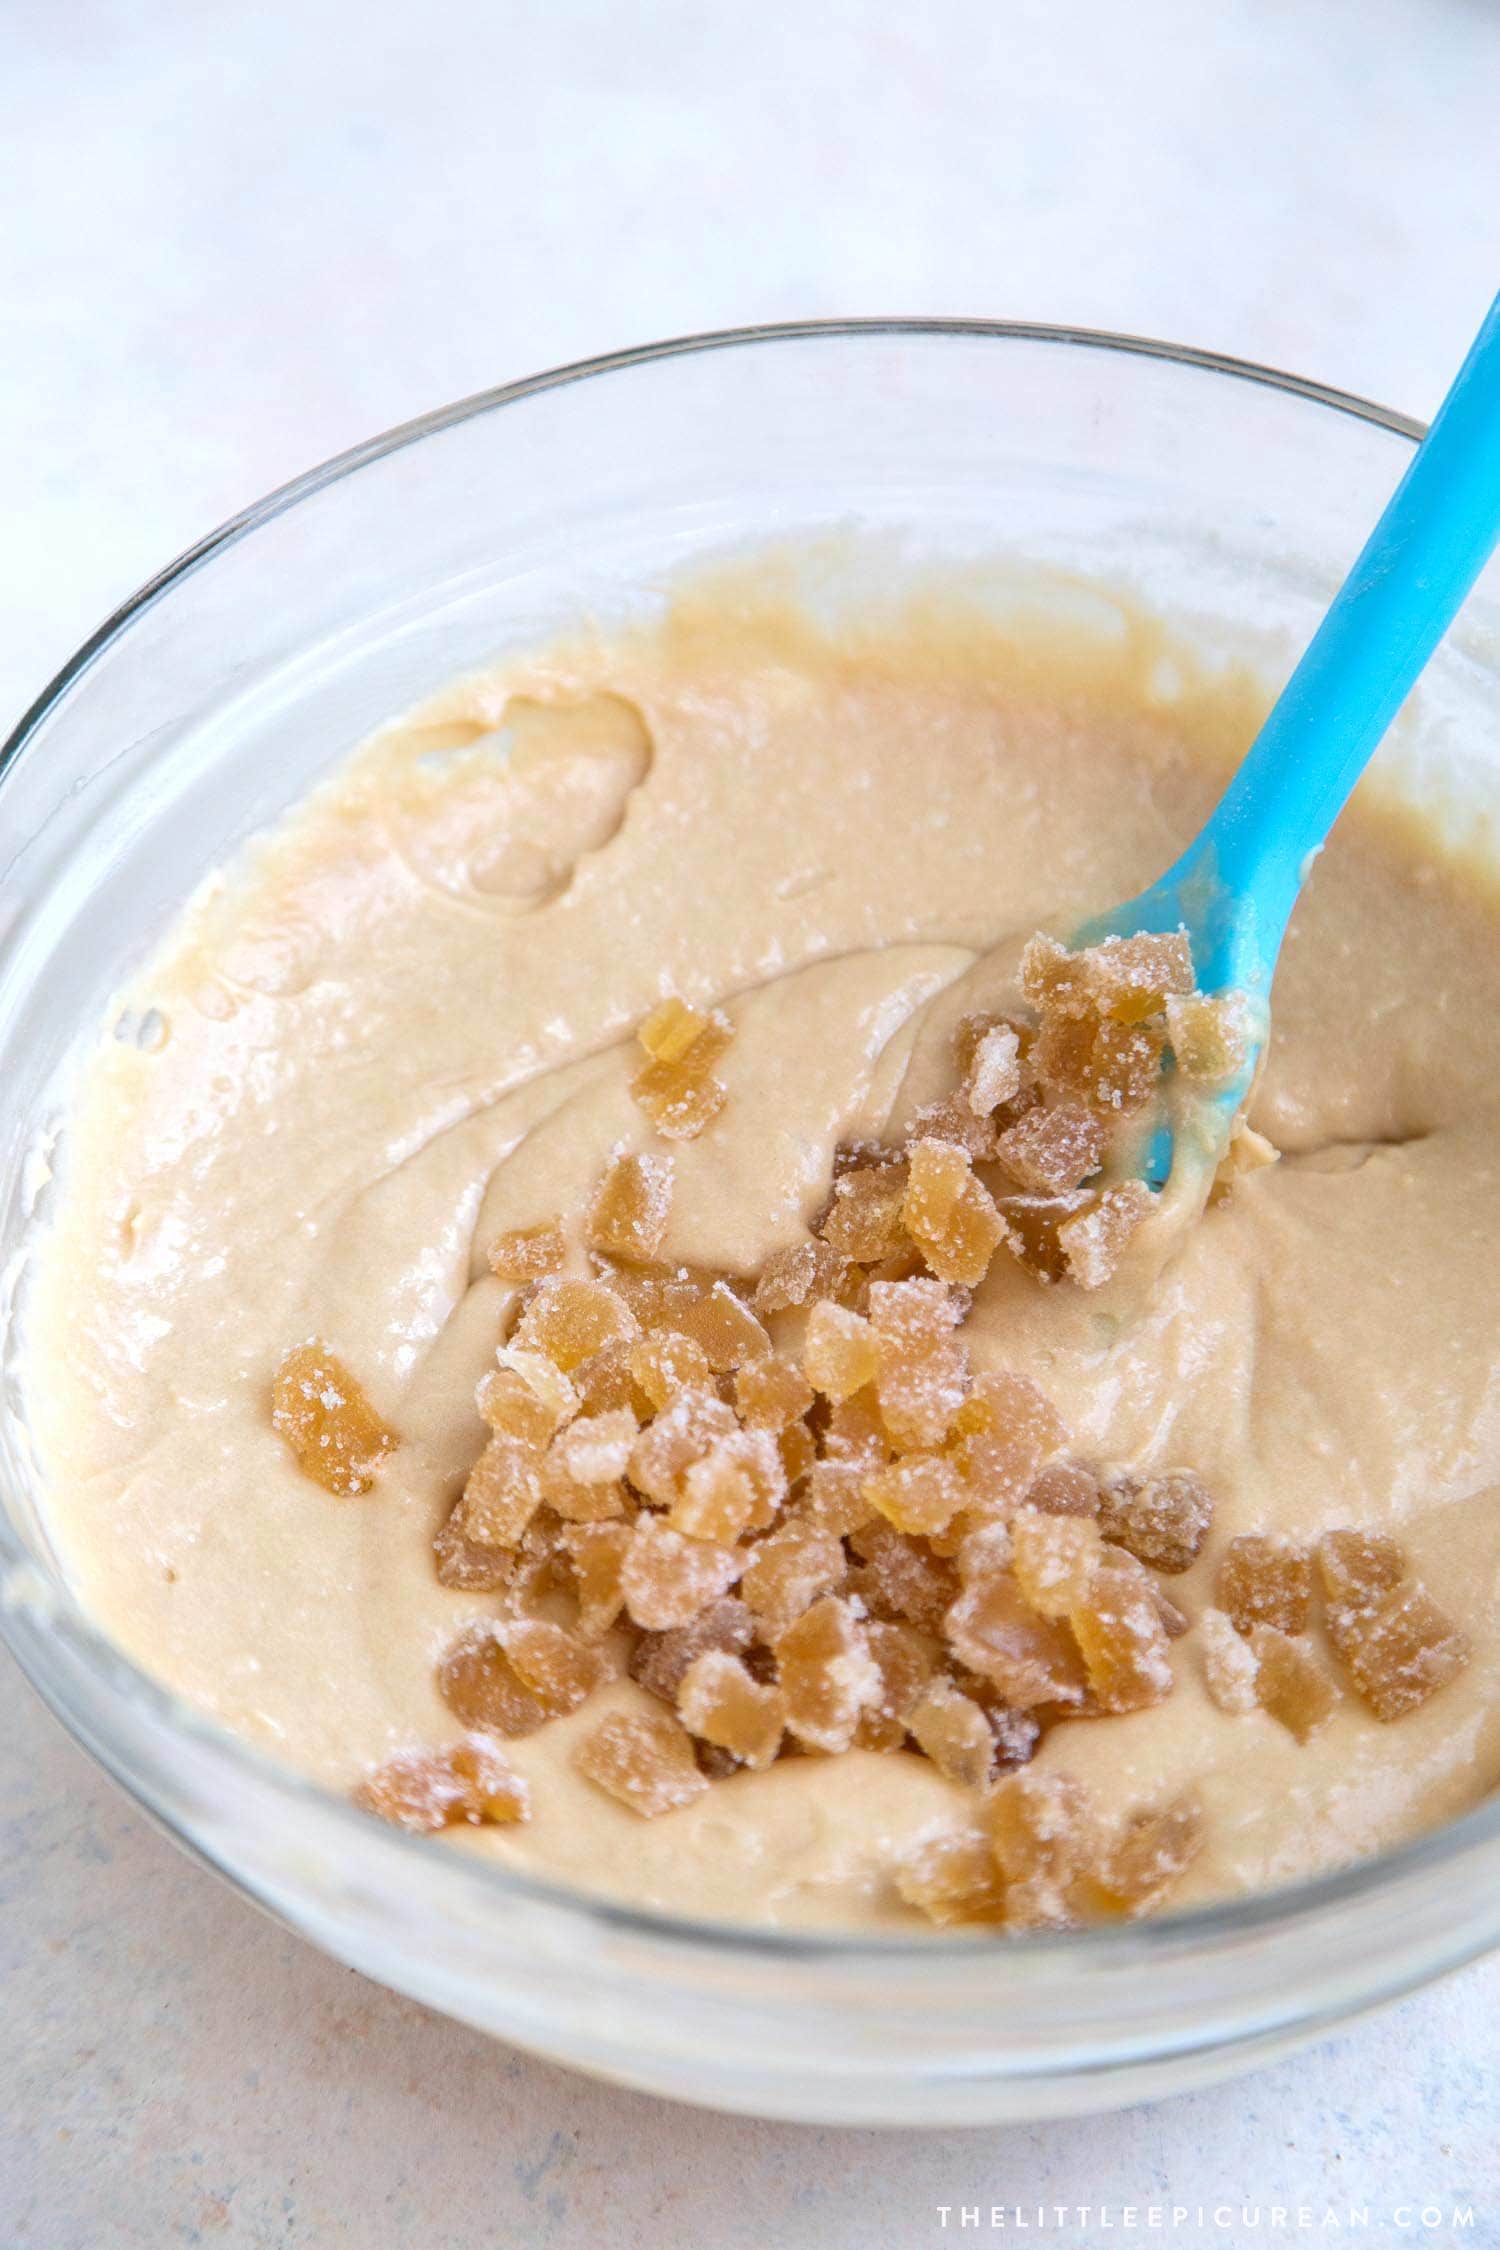 Ginger cake batter with candied ginger pieces